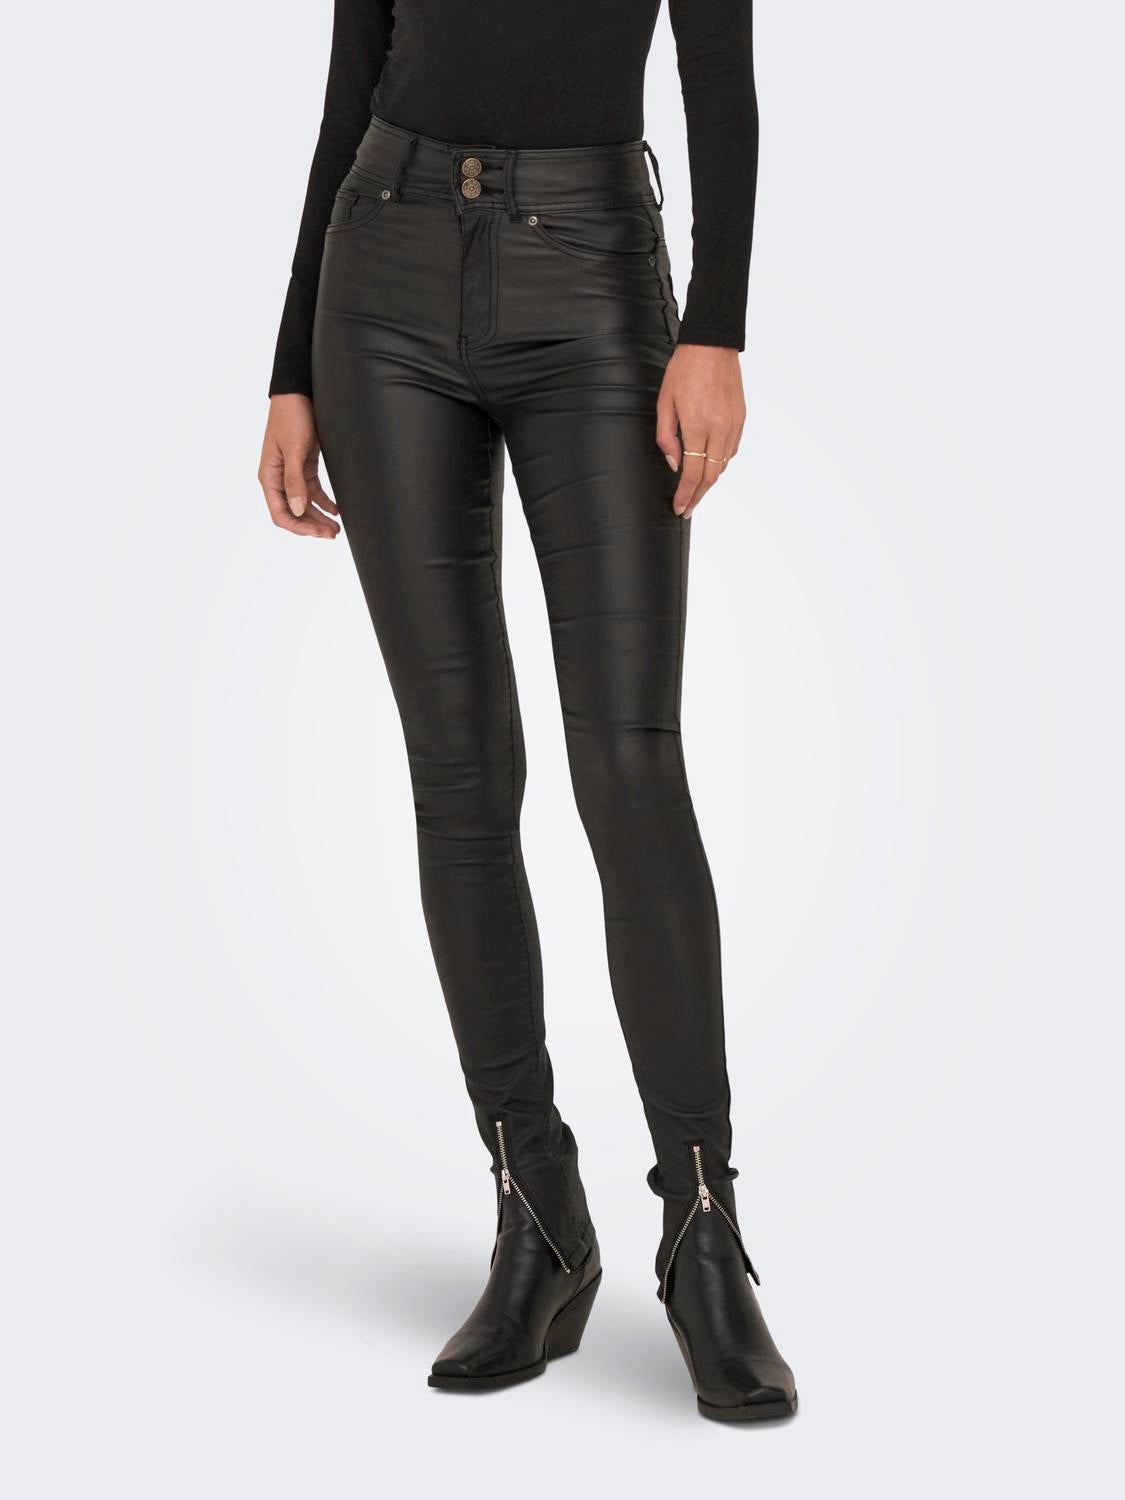 Tall Women's Skinny-Fit Trousers & Jeans | M&S